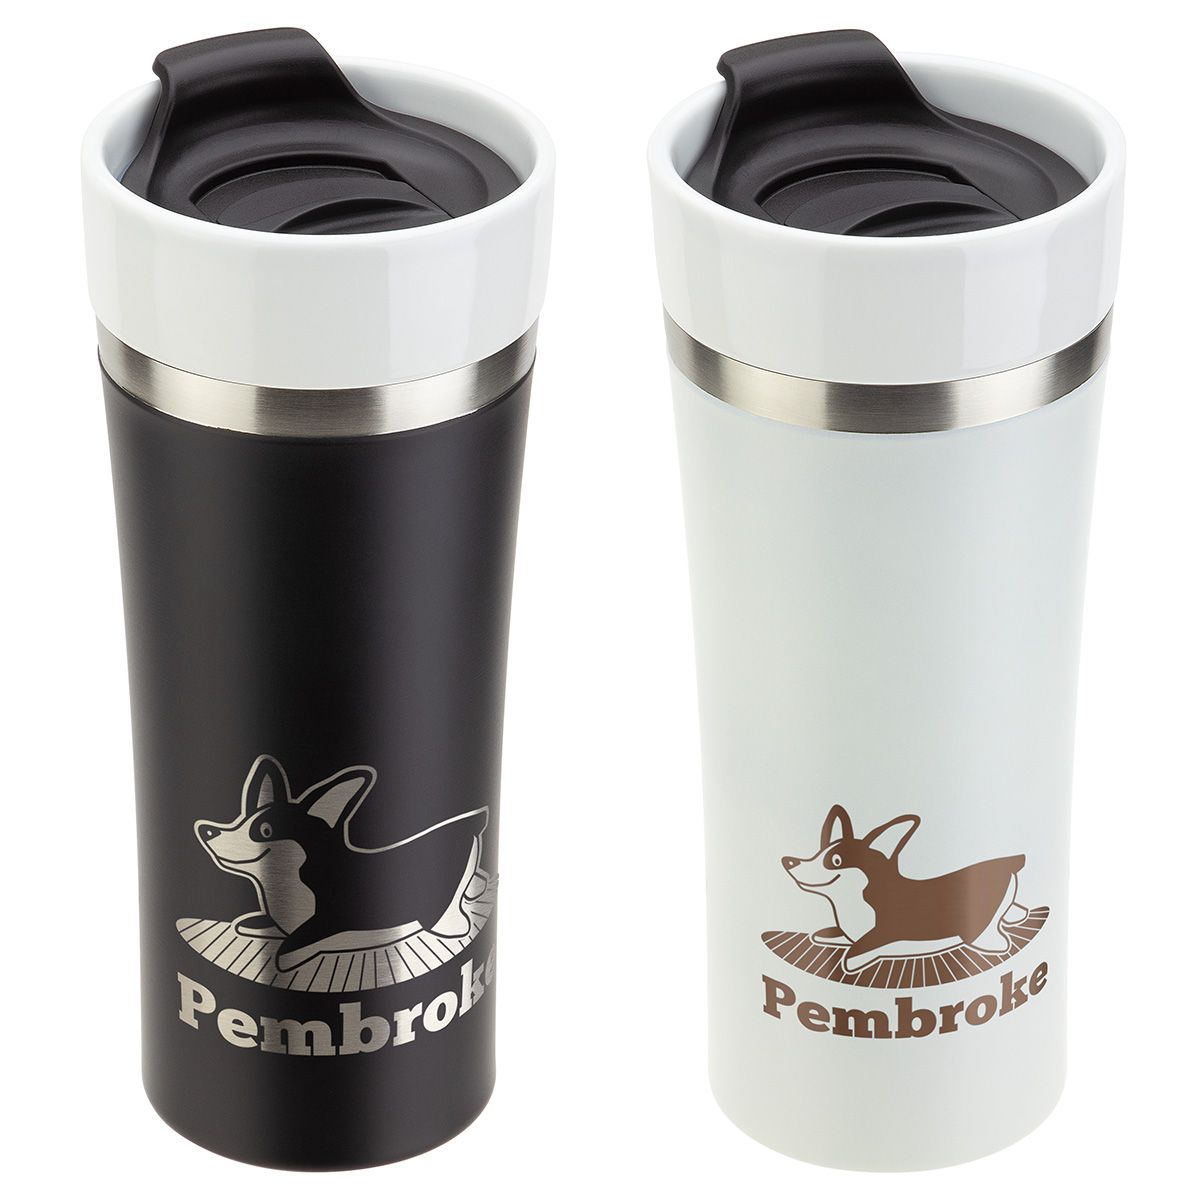 Pembroke 13 oz Ceramic and Stainless Steel Tumbler